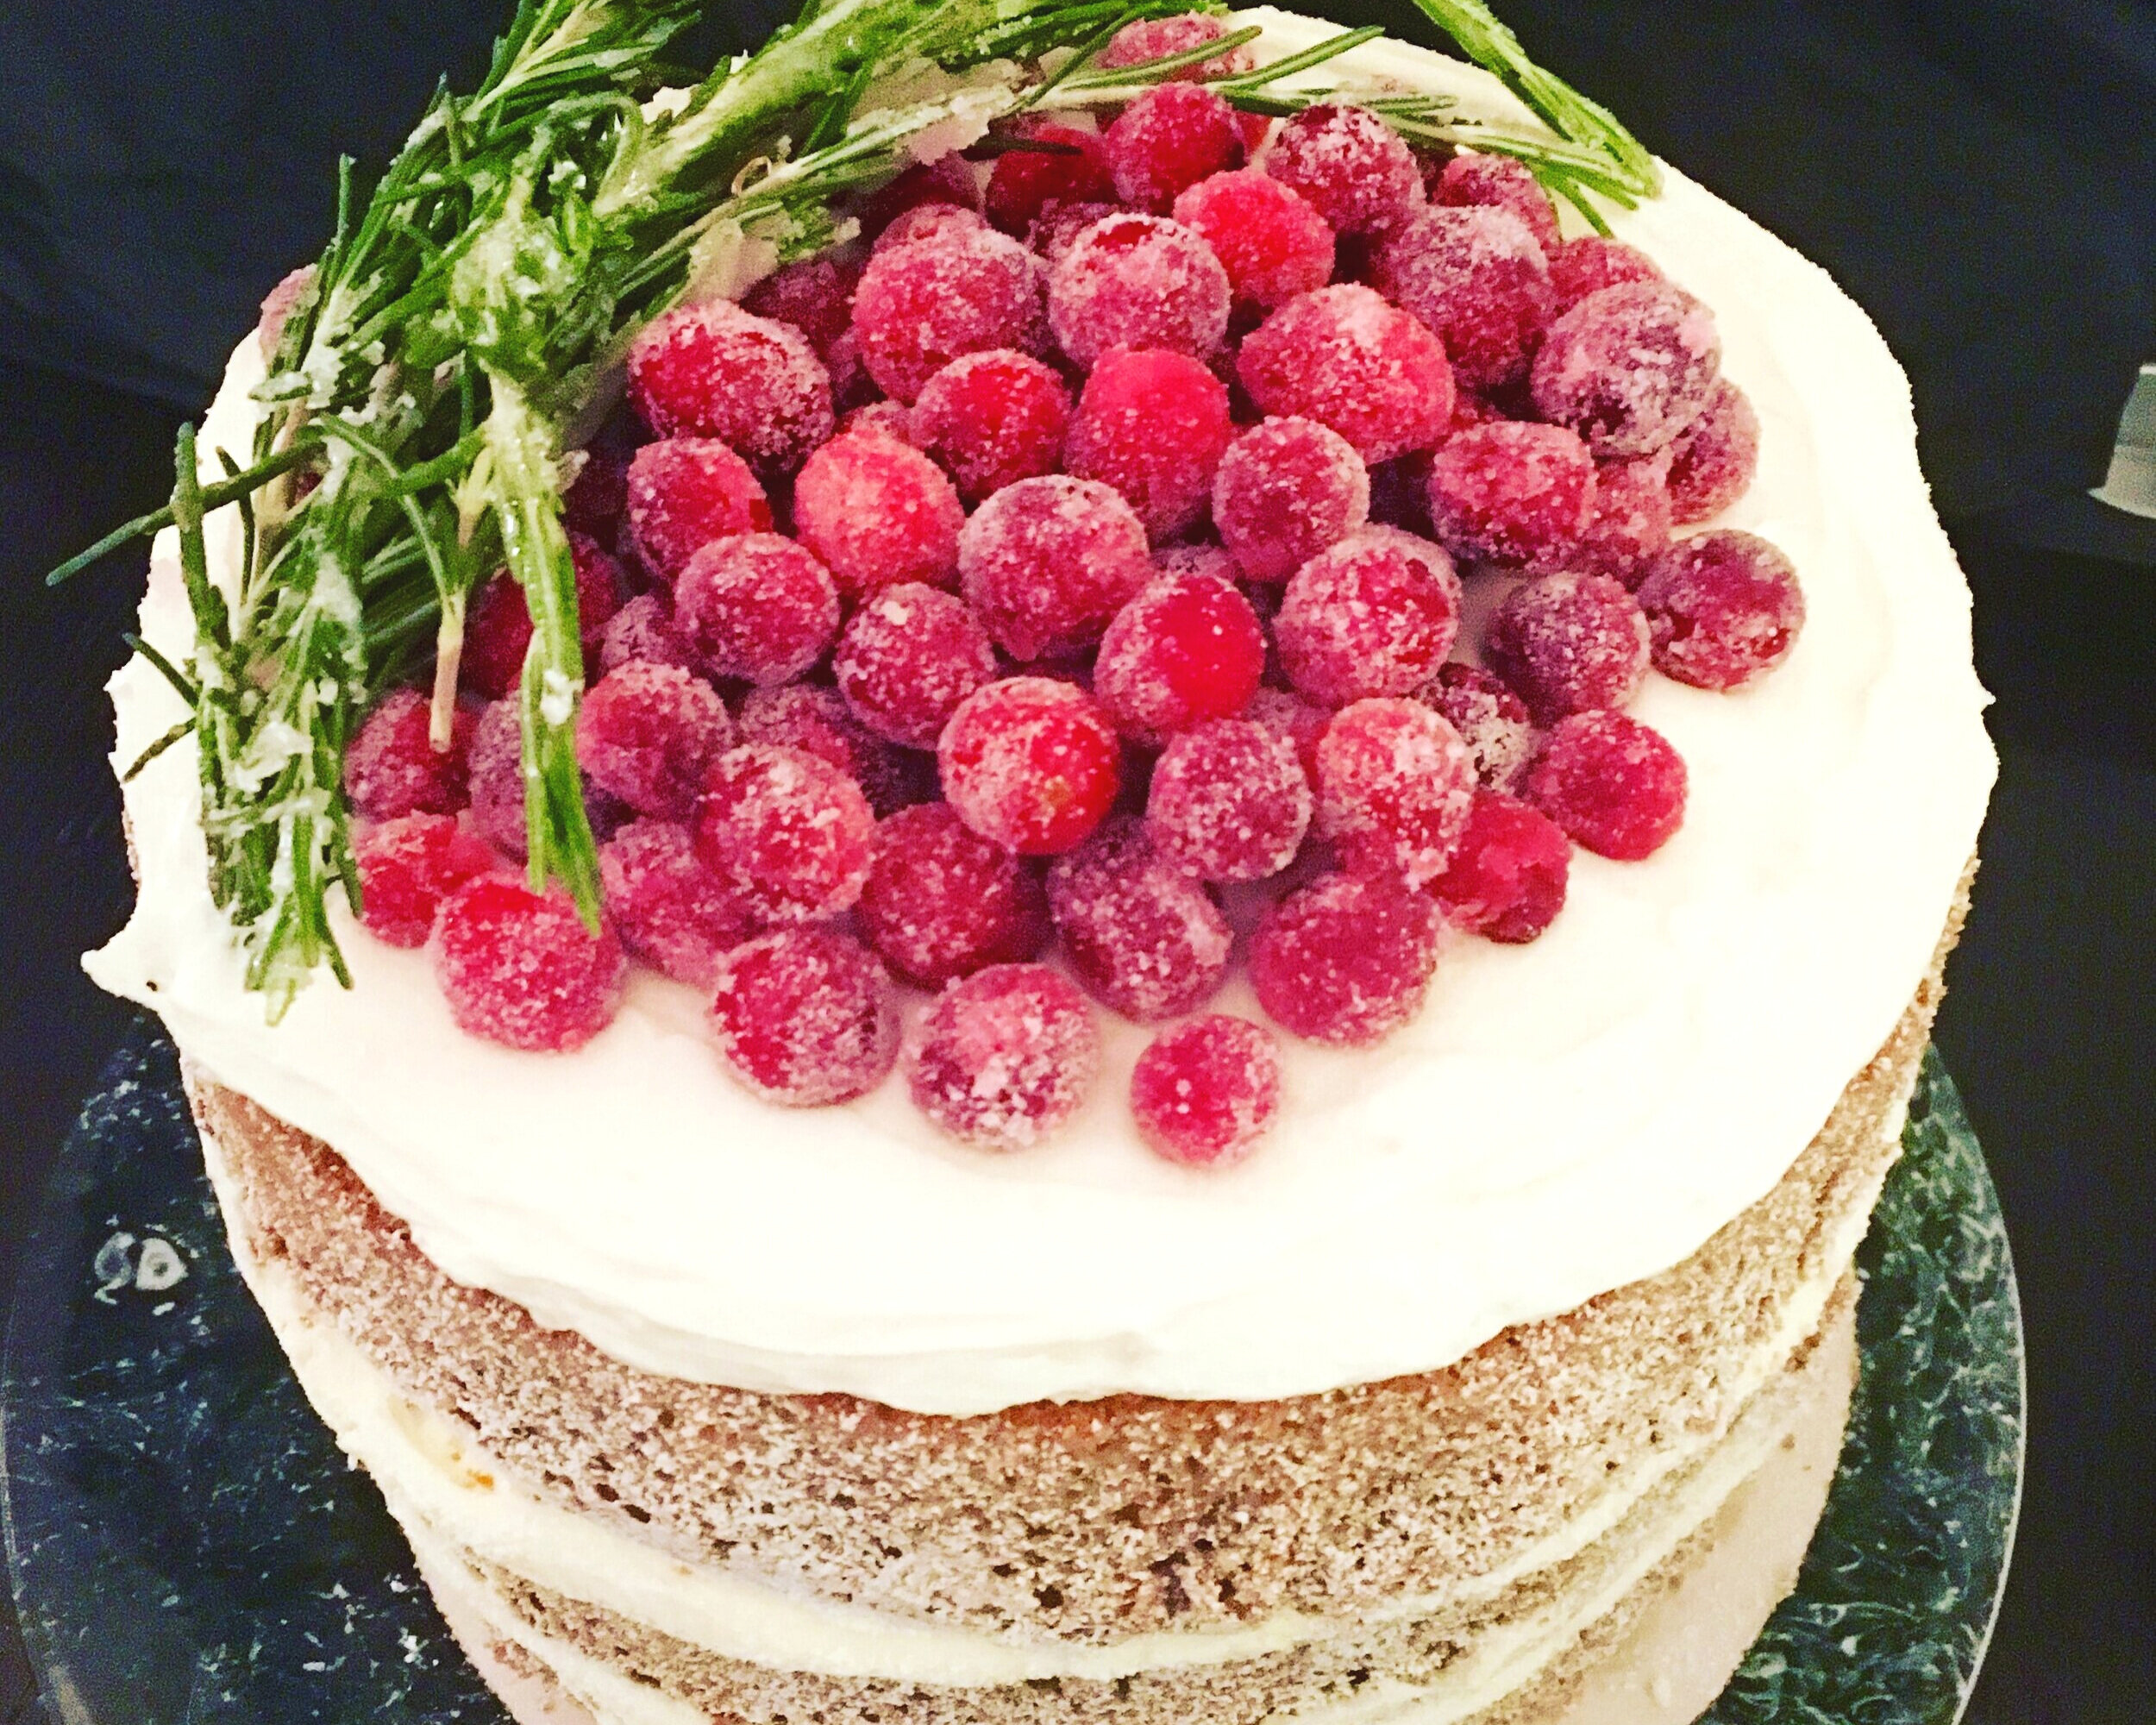 Multilayered "Naked" Spice Cake with maple buttercream + candied cranberries